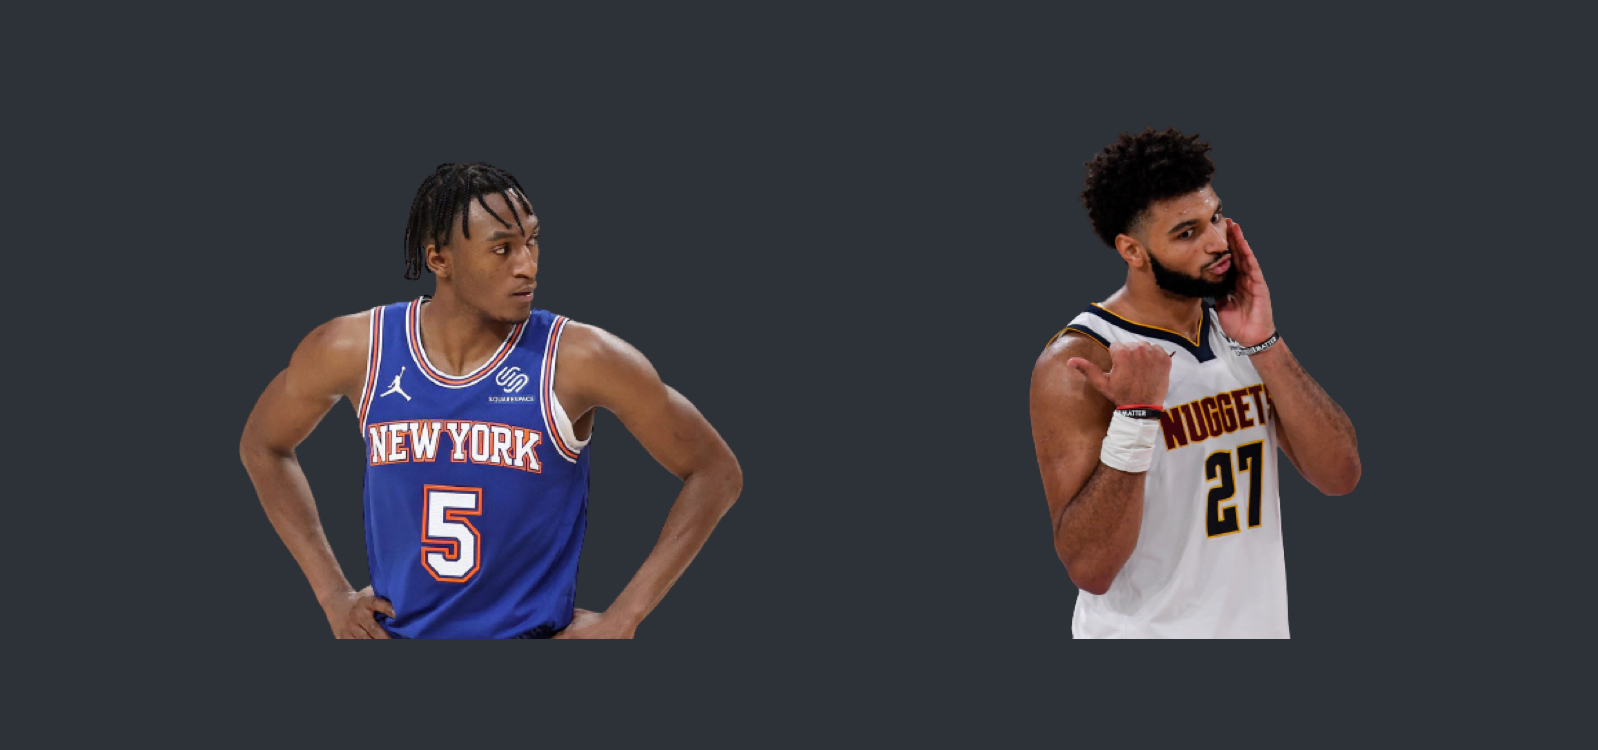 The Quick and Dirty Take data from the selected player's 2020-21 NBA Season Calculate the selected player's percentile for each stat against